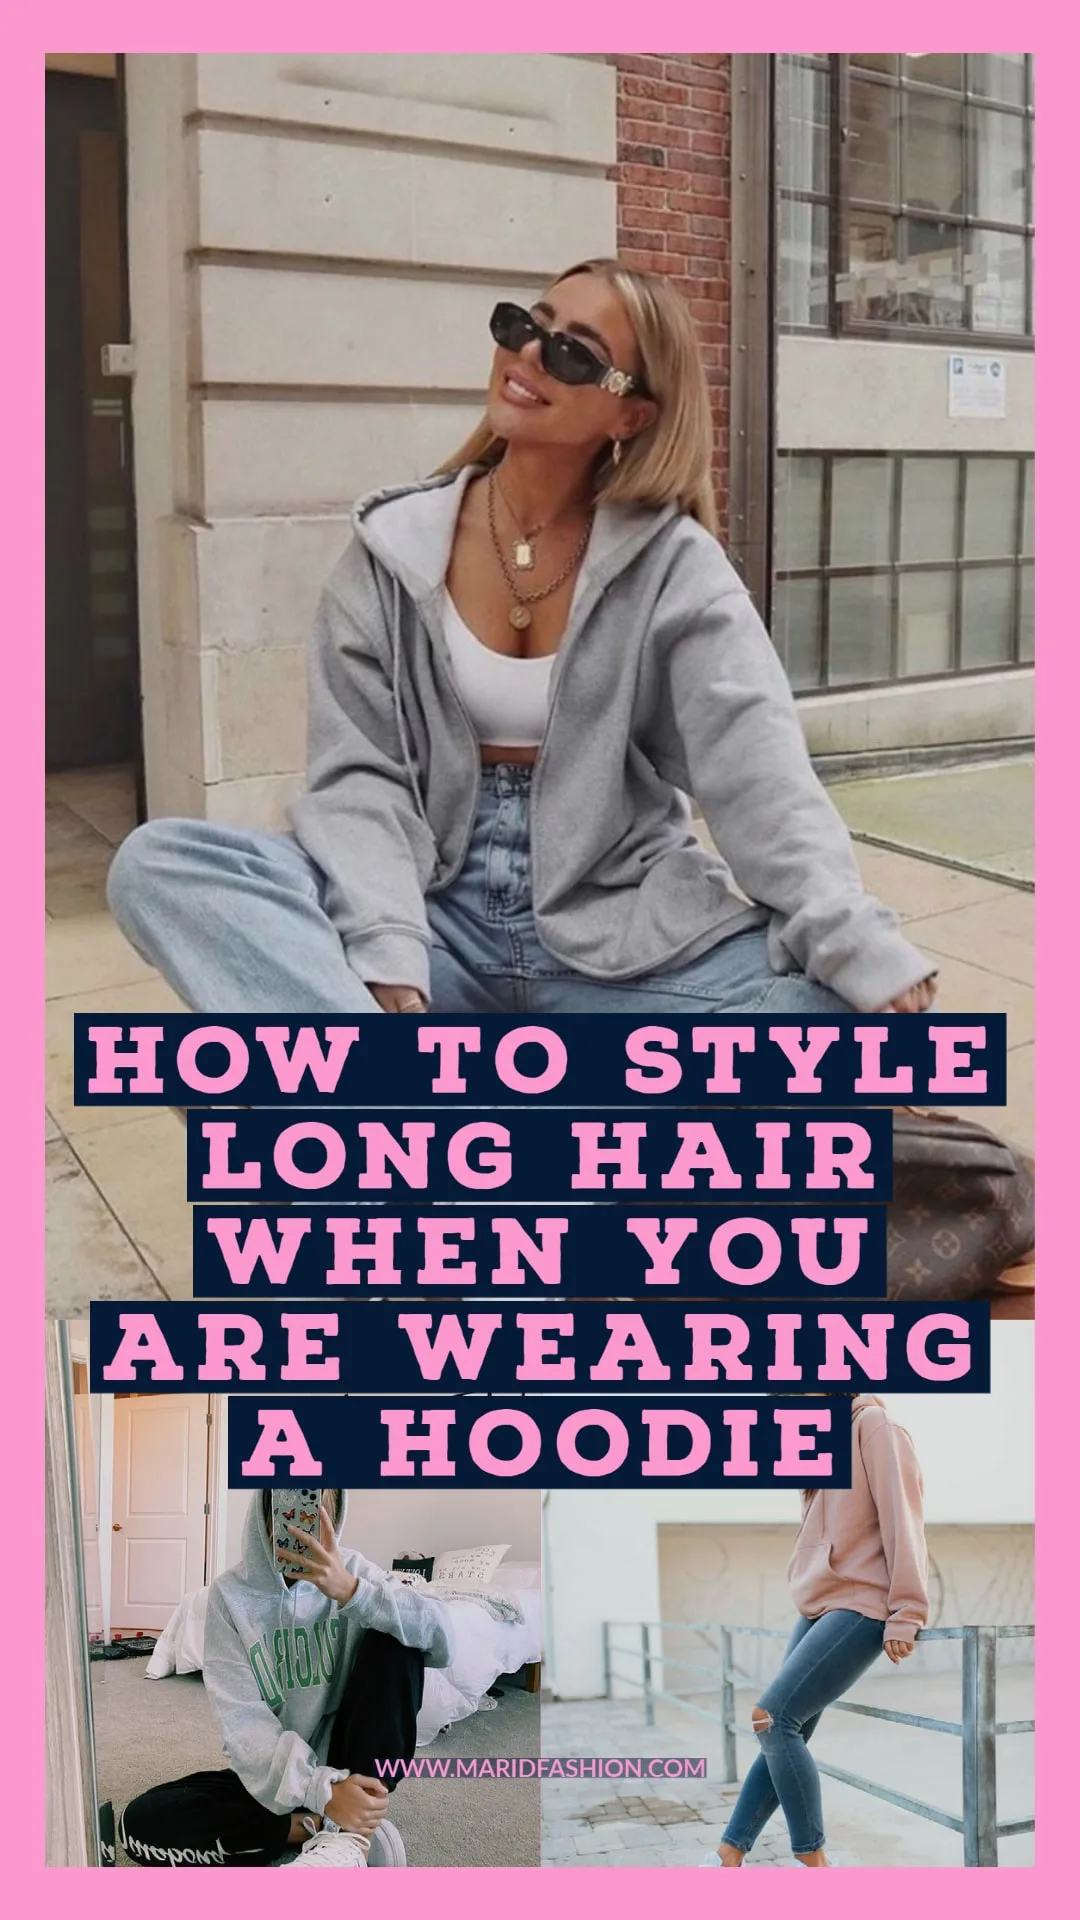 How to Wear a Hoodie With Long Hair? Not a problem anymore